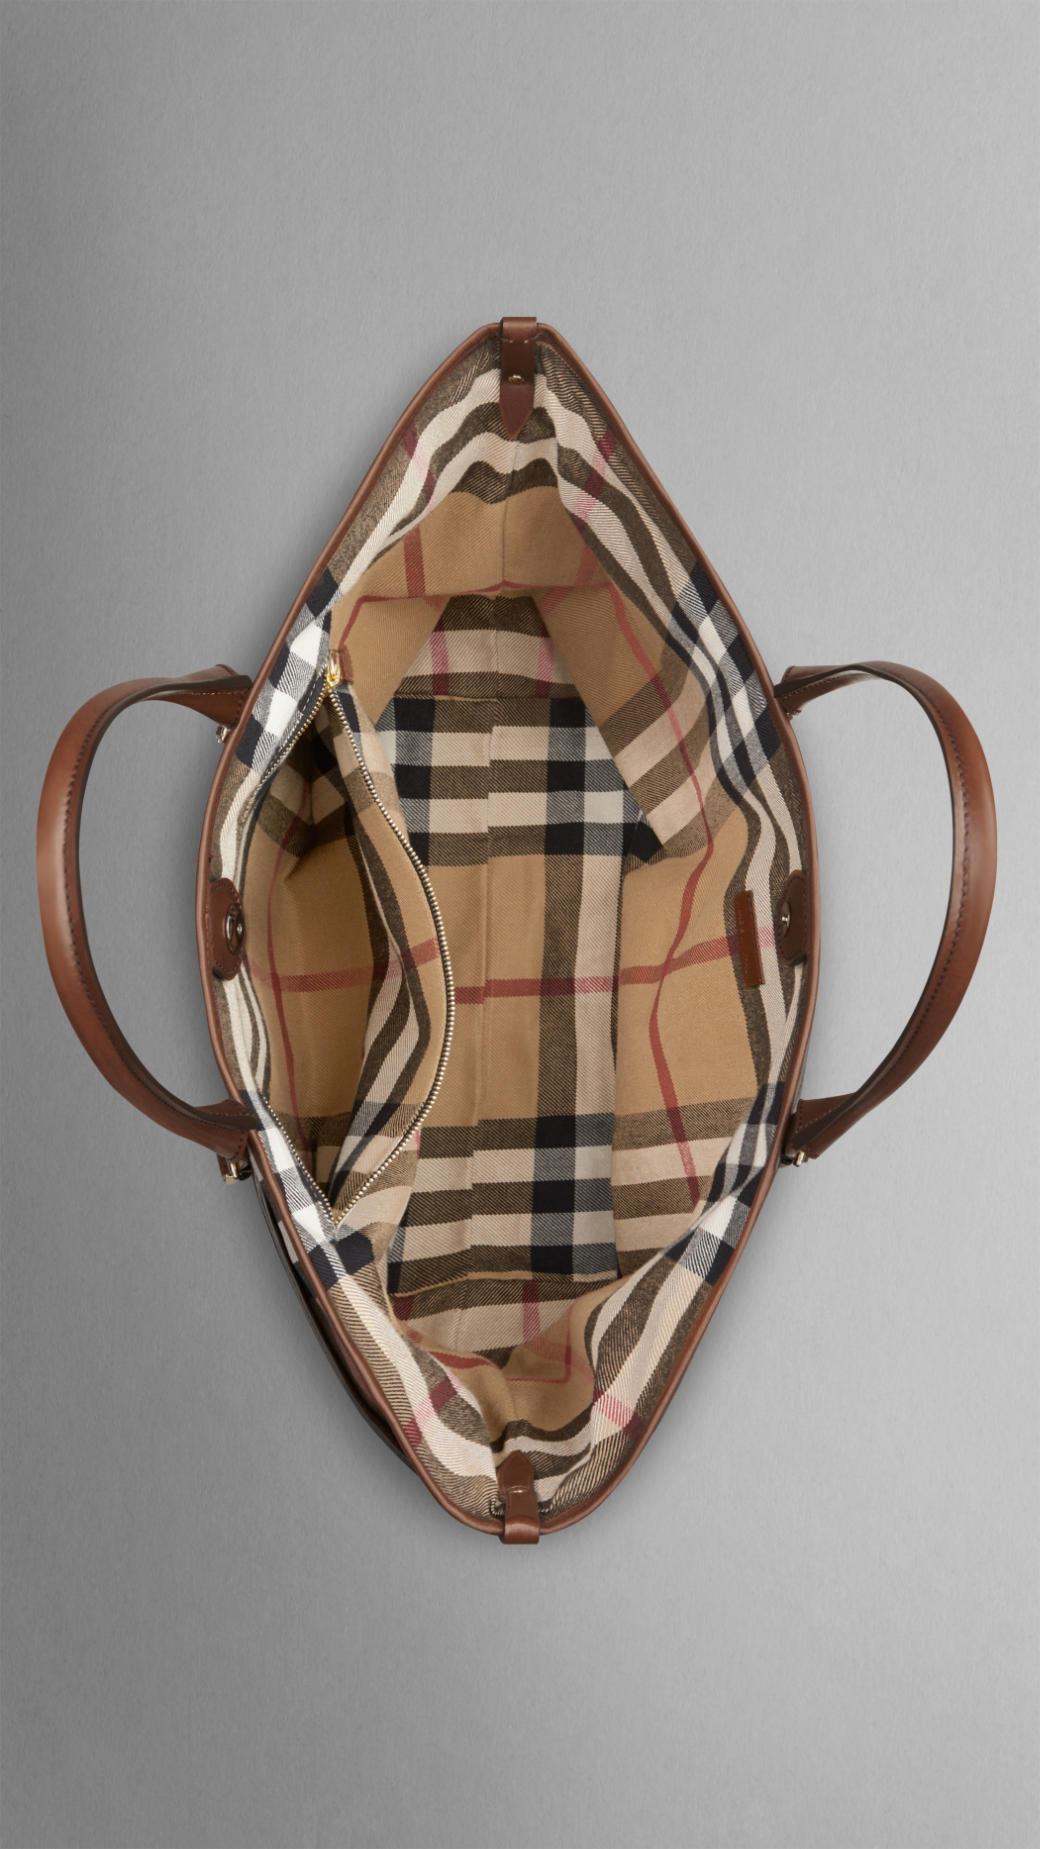 Lyst - Burberry Medium Leather And House Check Tote Bag in Brown